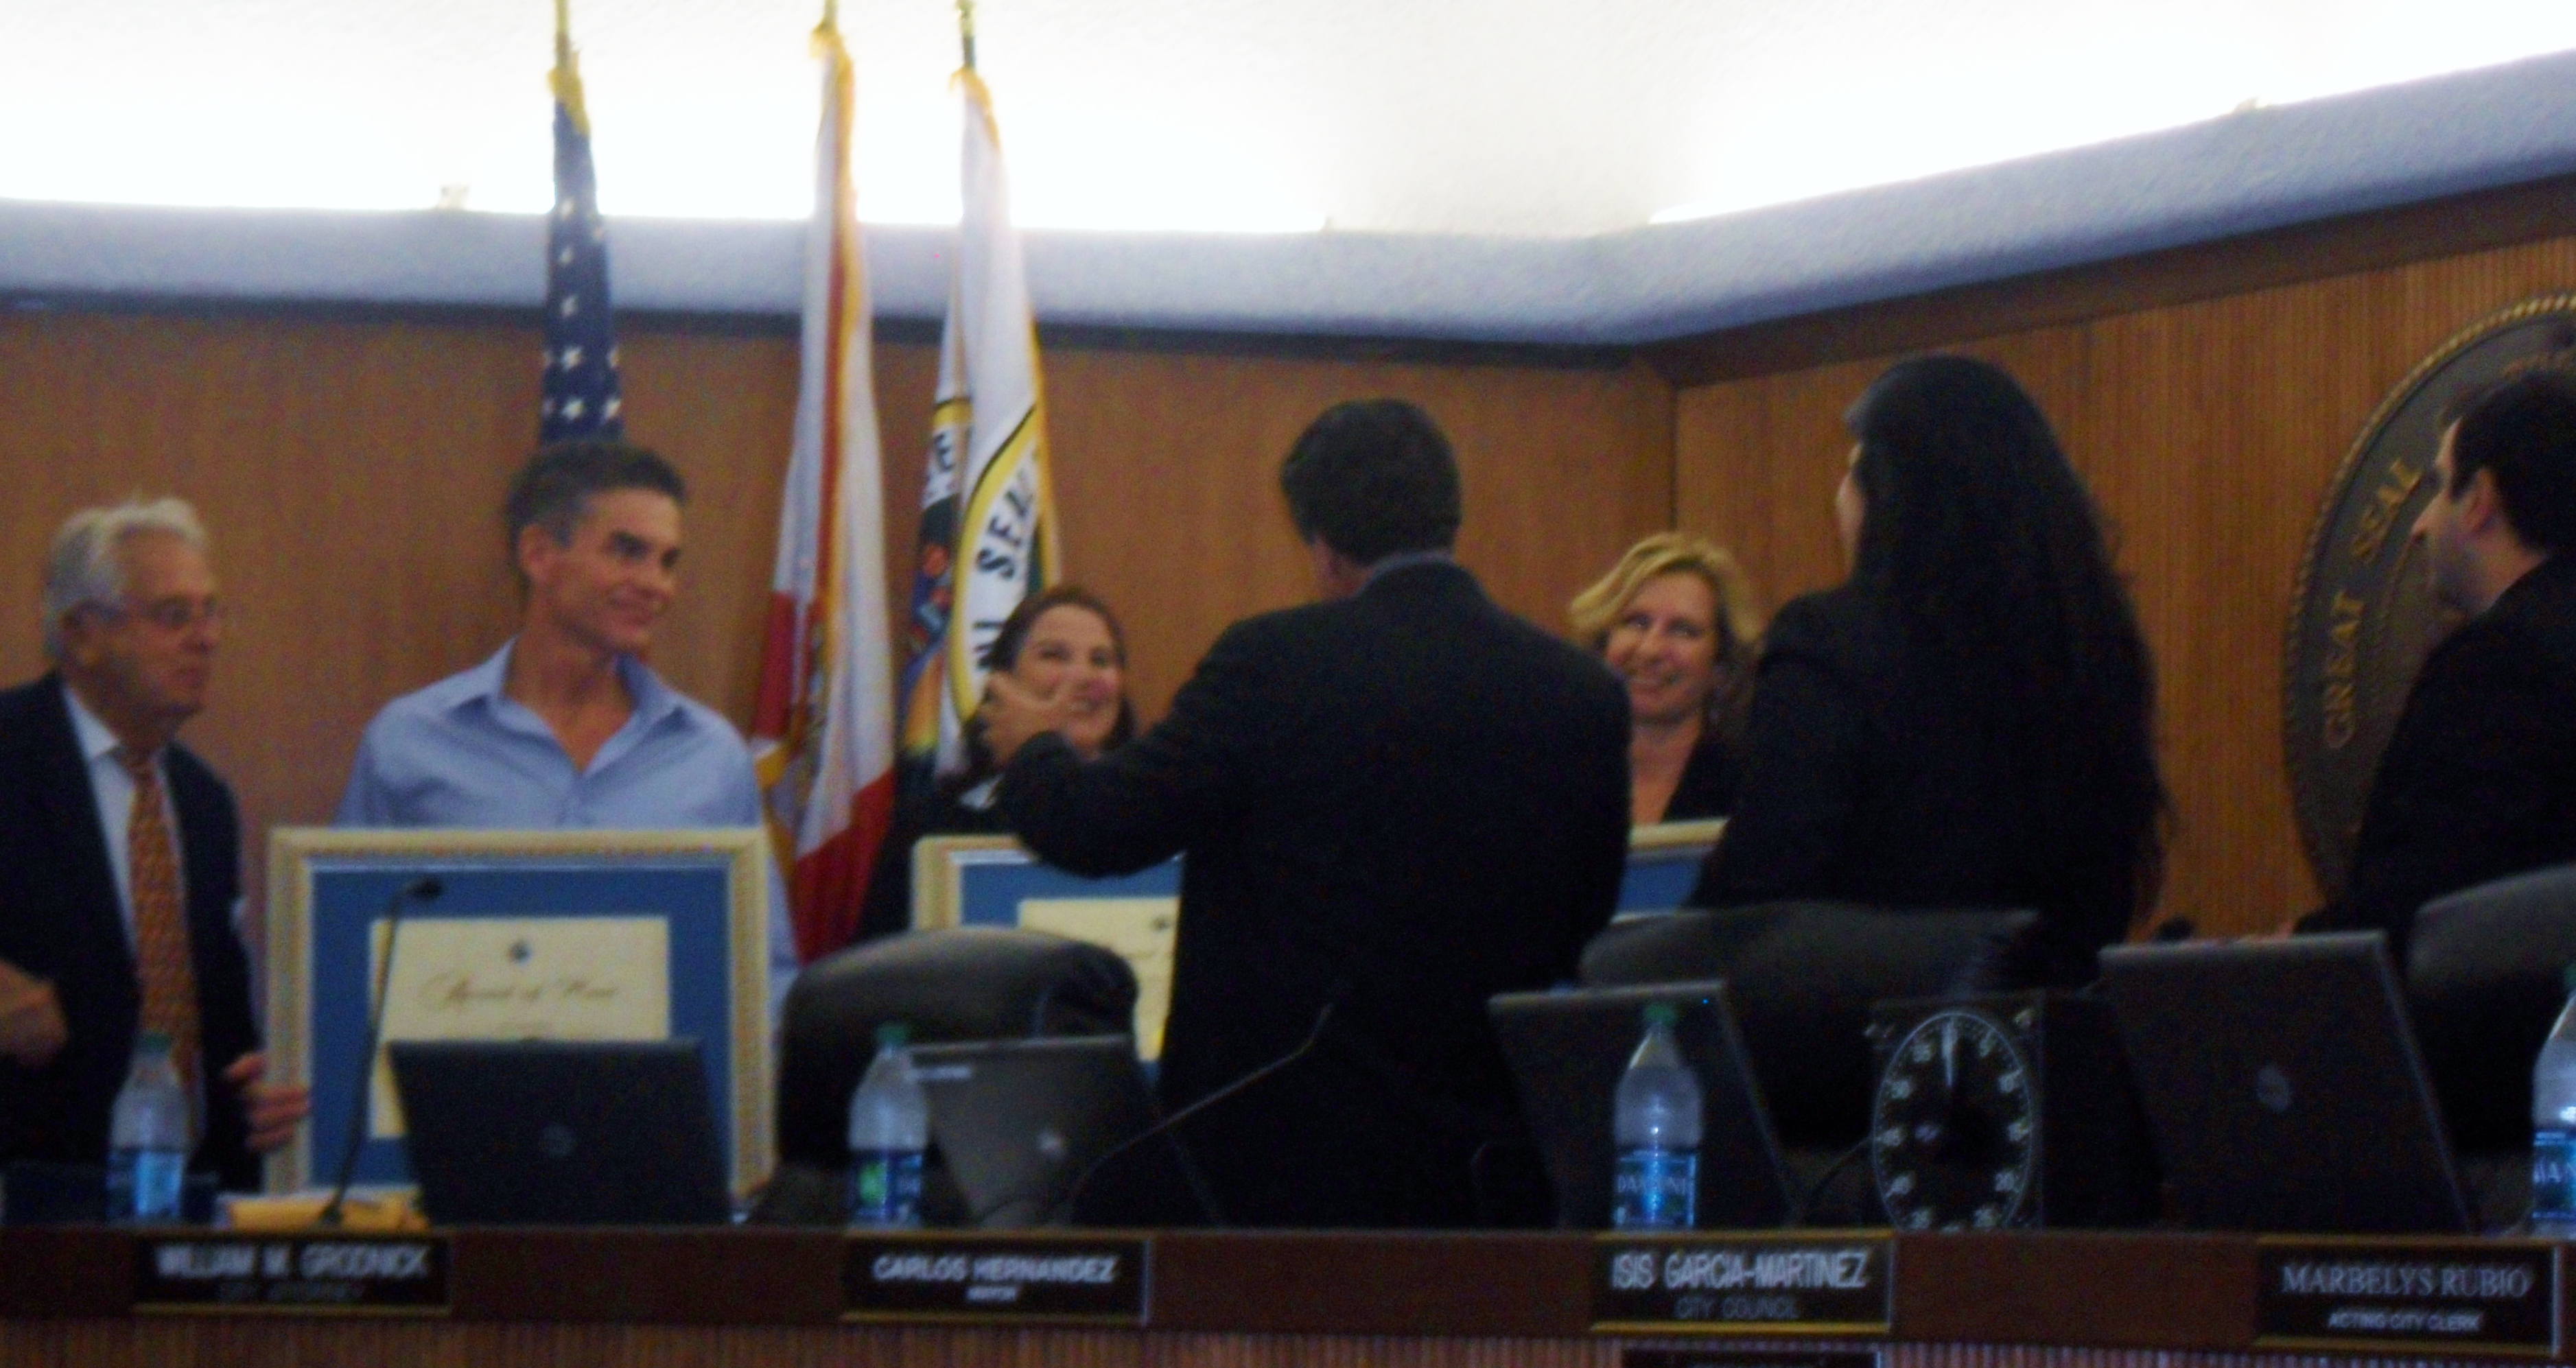 Steven Brack, Writer/Director-Debra Hall-Green and Executive Producer-Adrianne Kennedy receive Merit Awards from the City Of Hialeah, Florida and Mayor Carlos Hernandez for their work in the PBS documentary, 